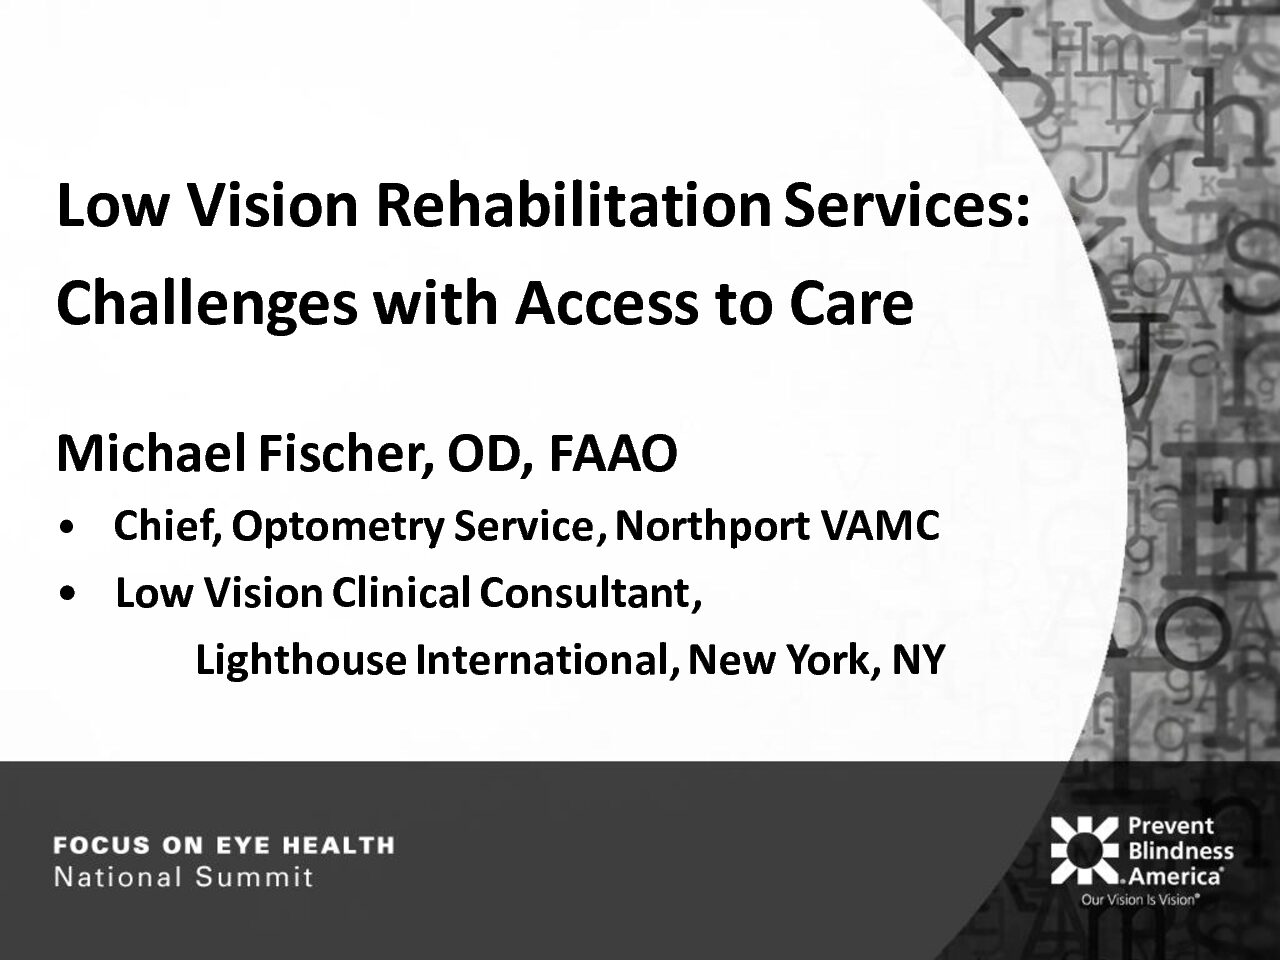 Low Vision Rehabilitation Services: Challenges with Access to Care